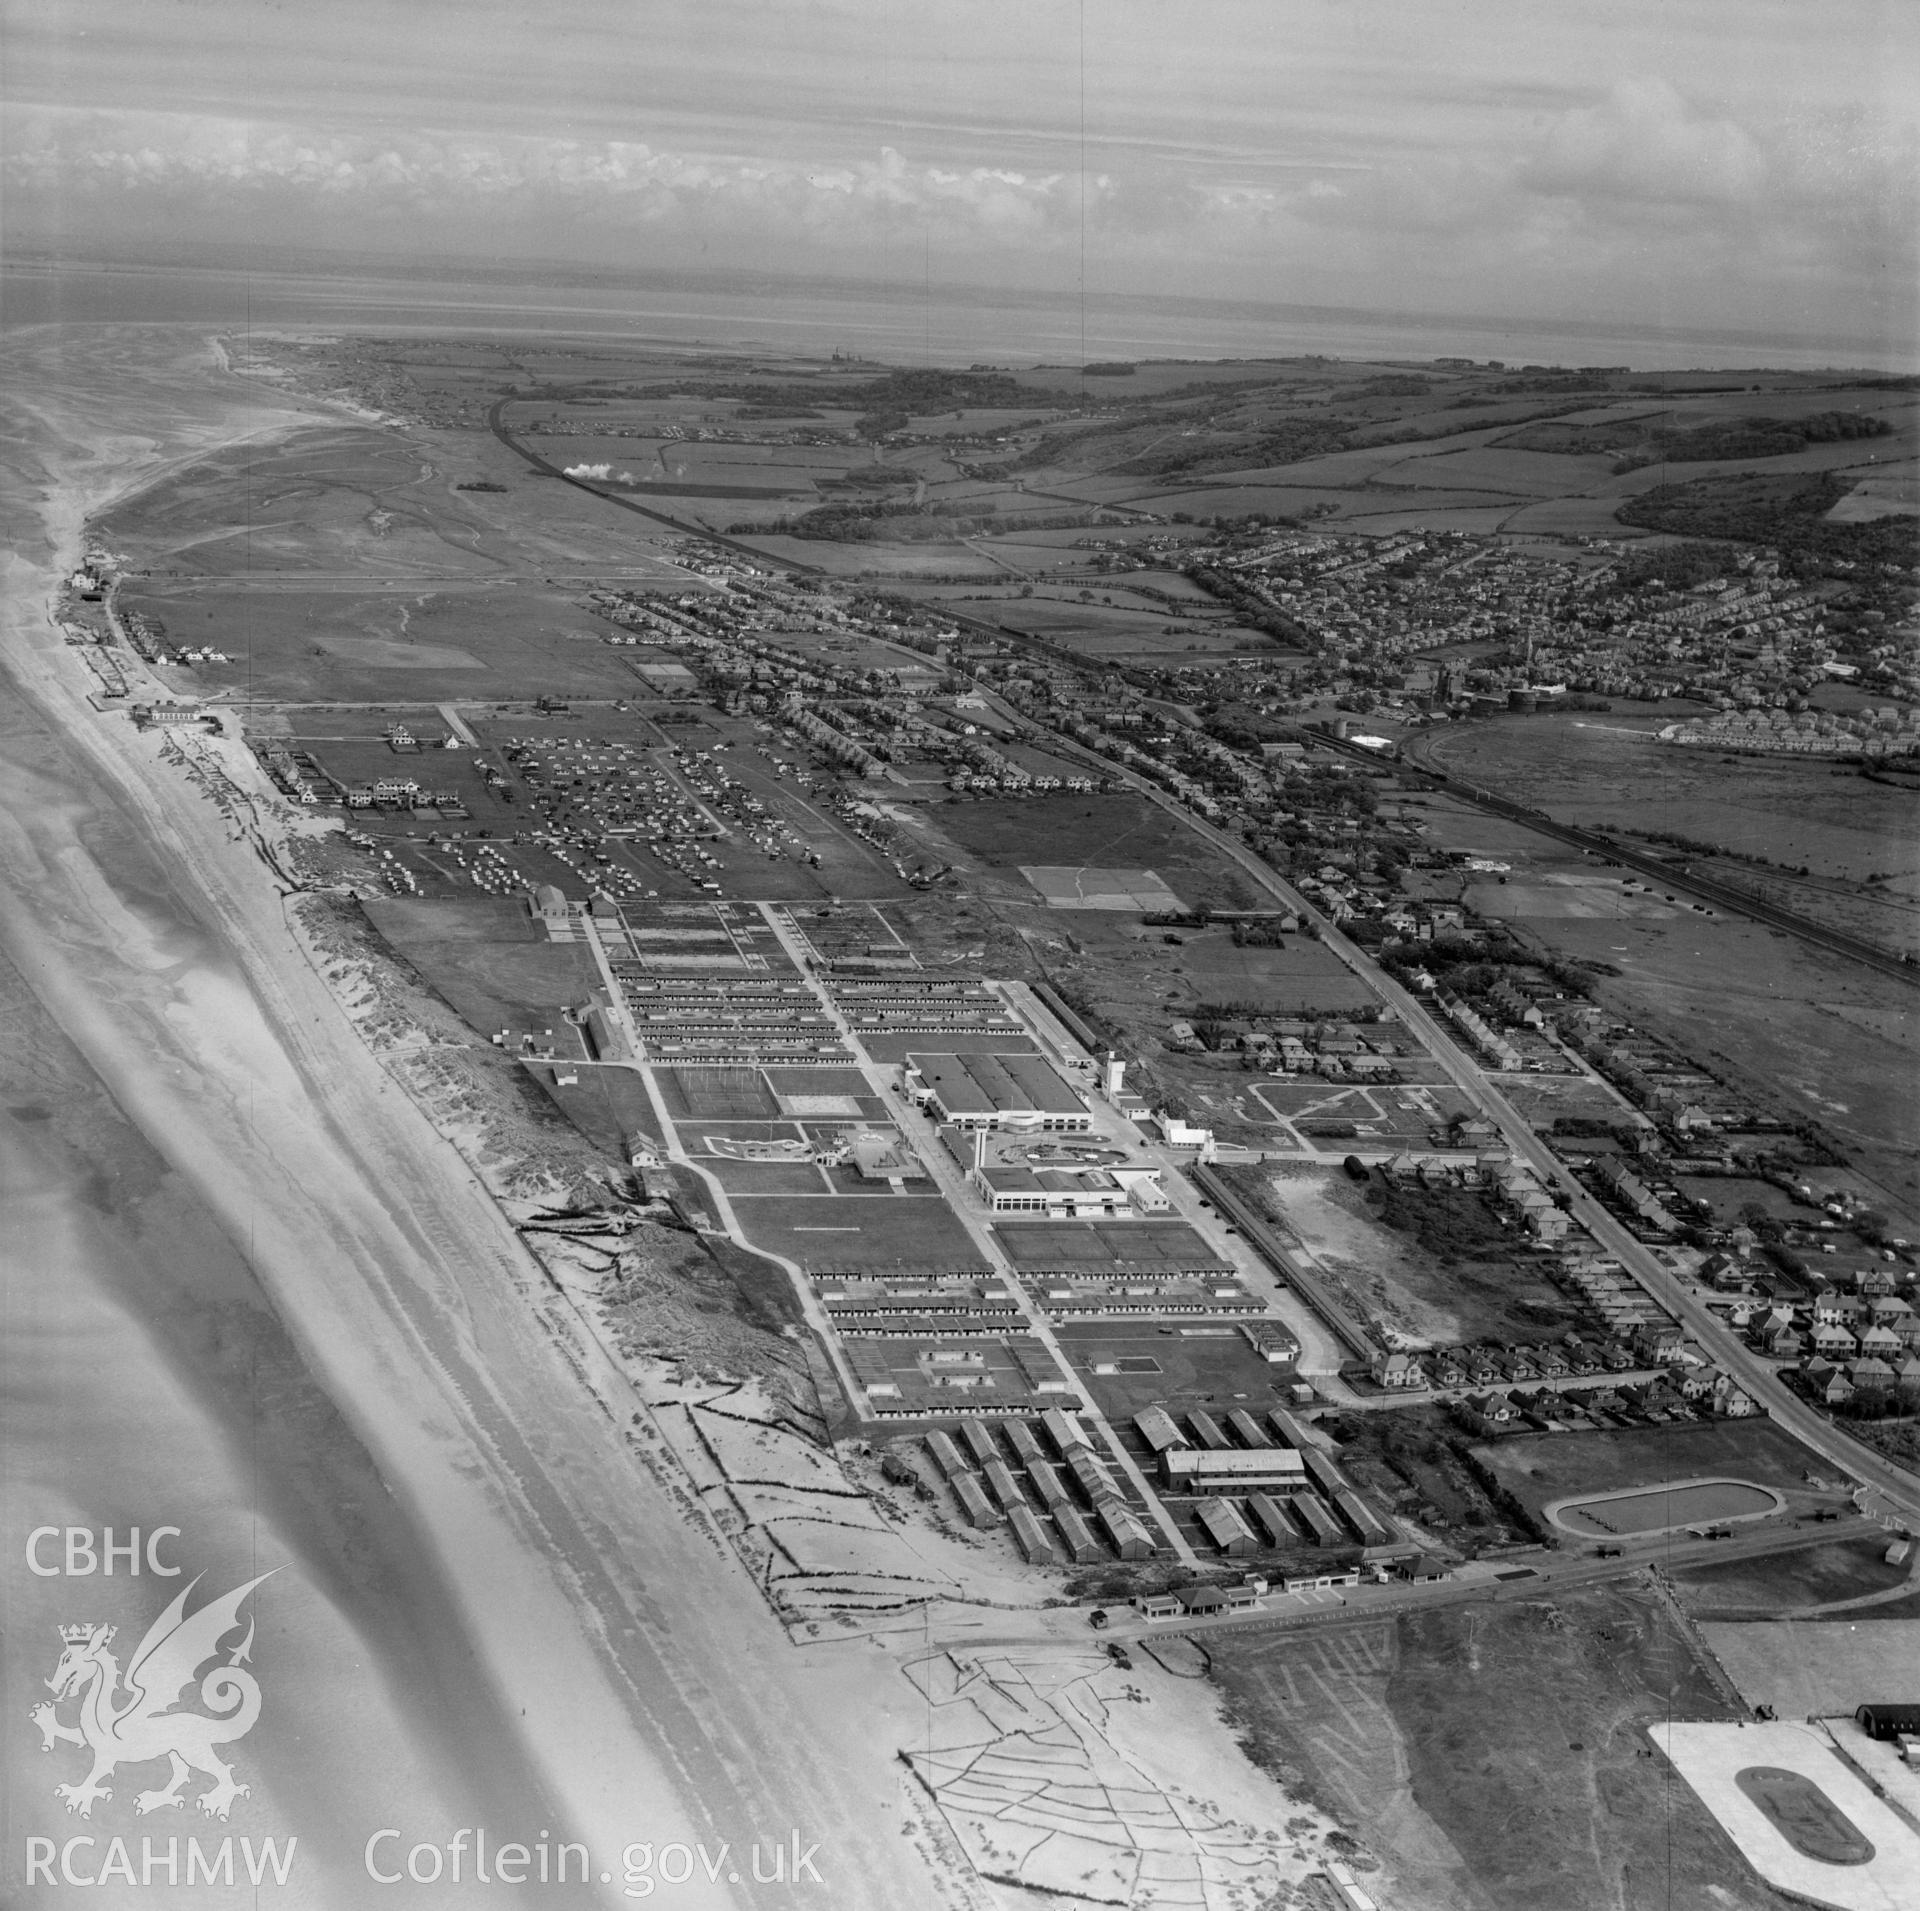 View of Prestatyn showing holiday camps